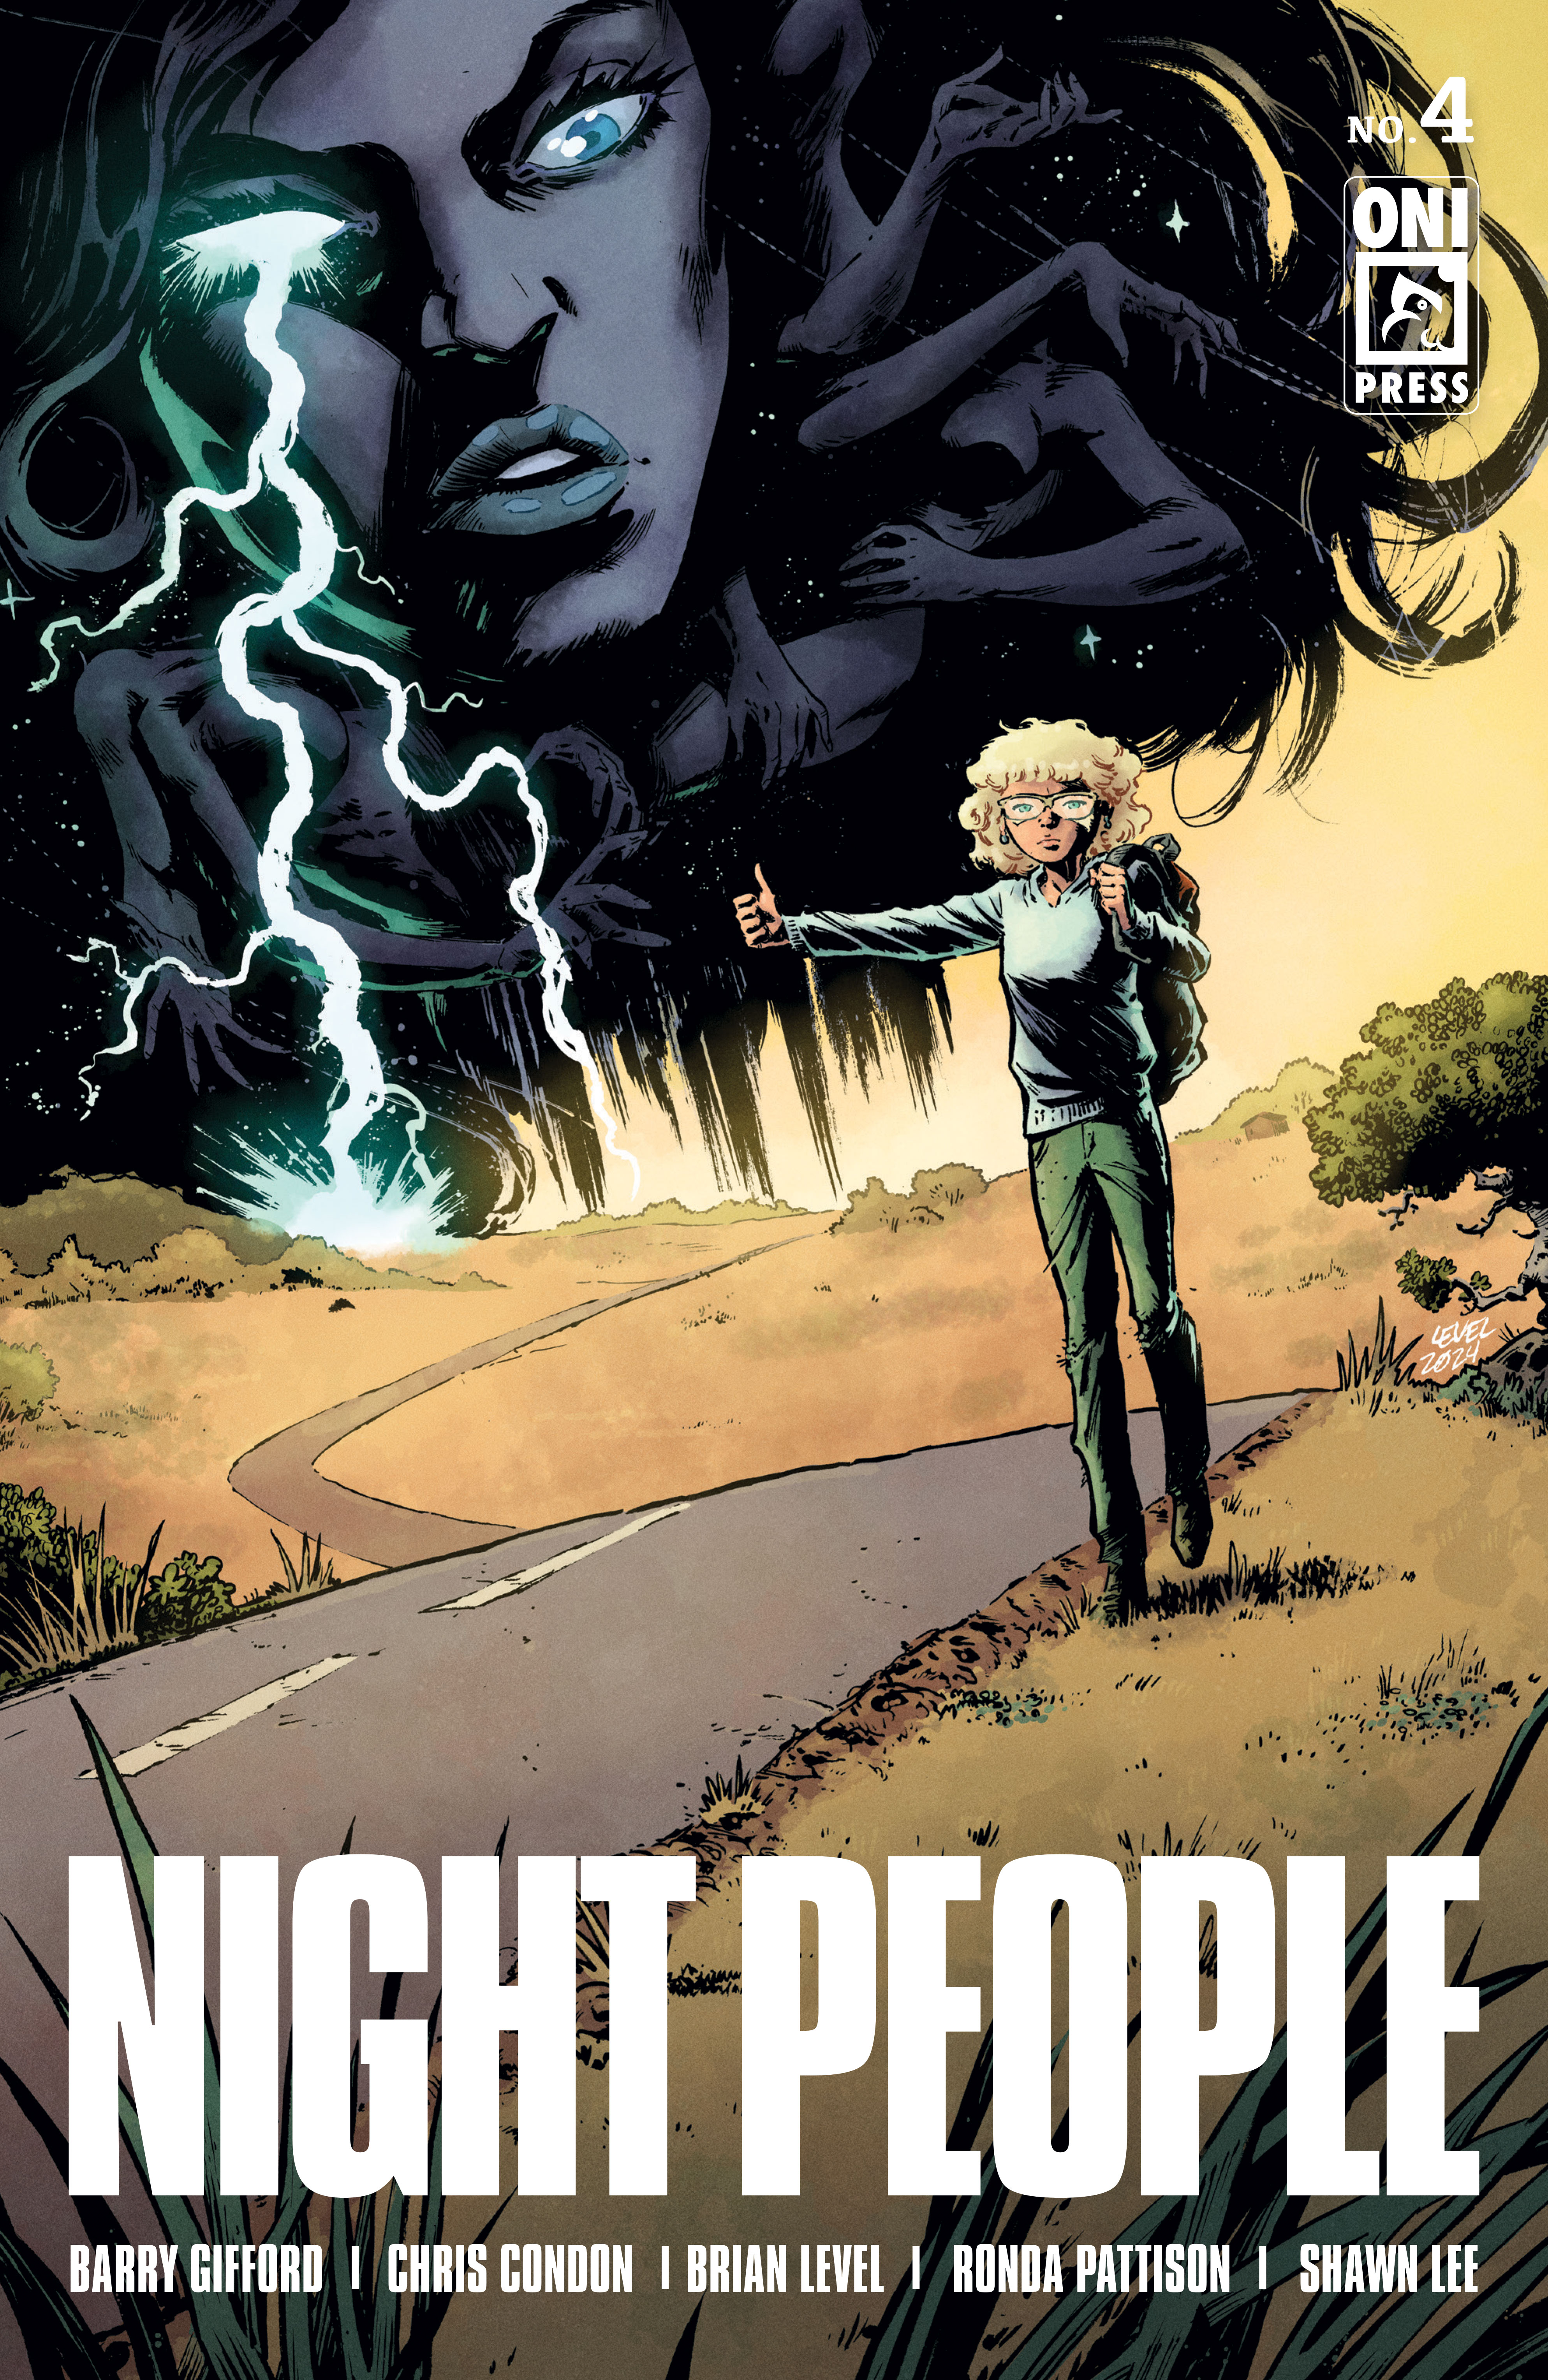 Night People #4 Cover A Brian Level (Mature) (Of 4)